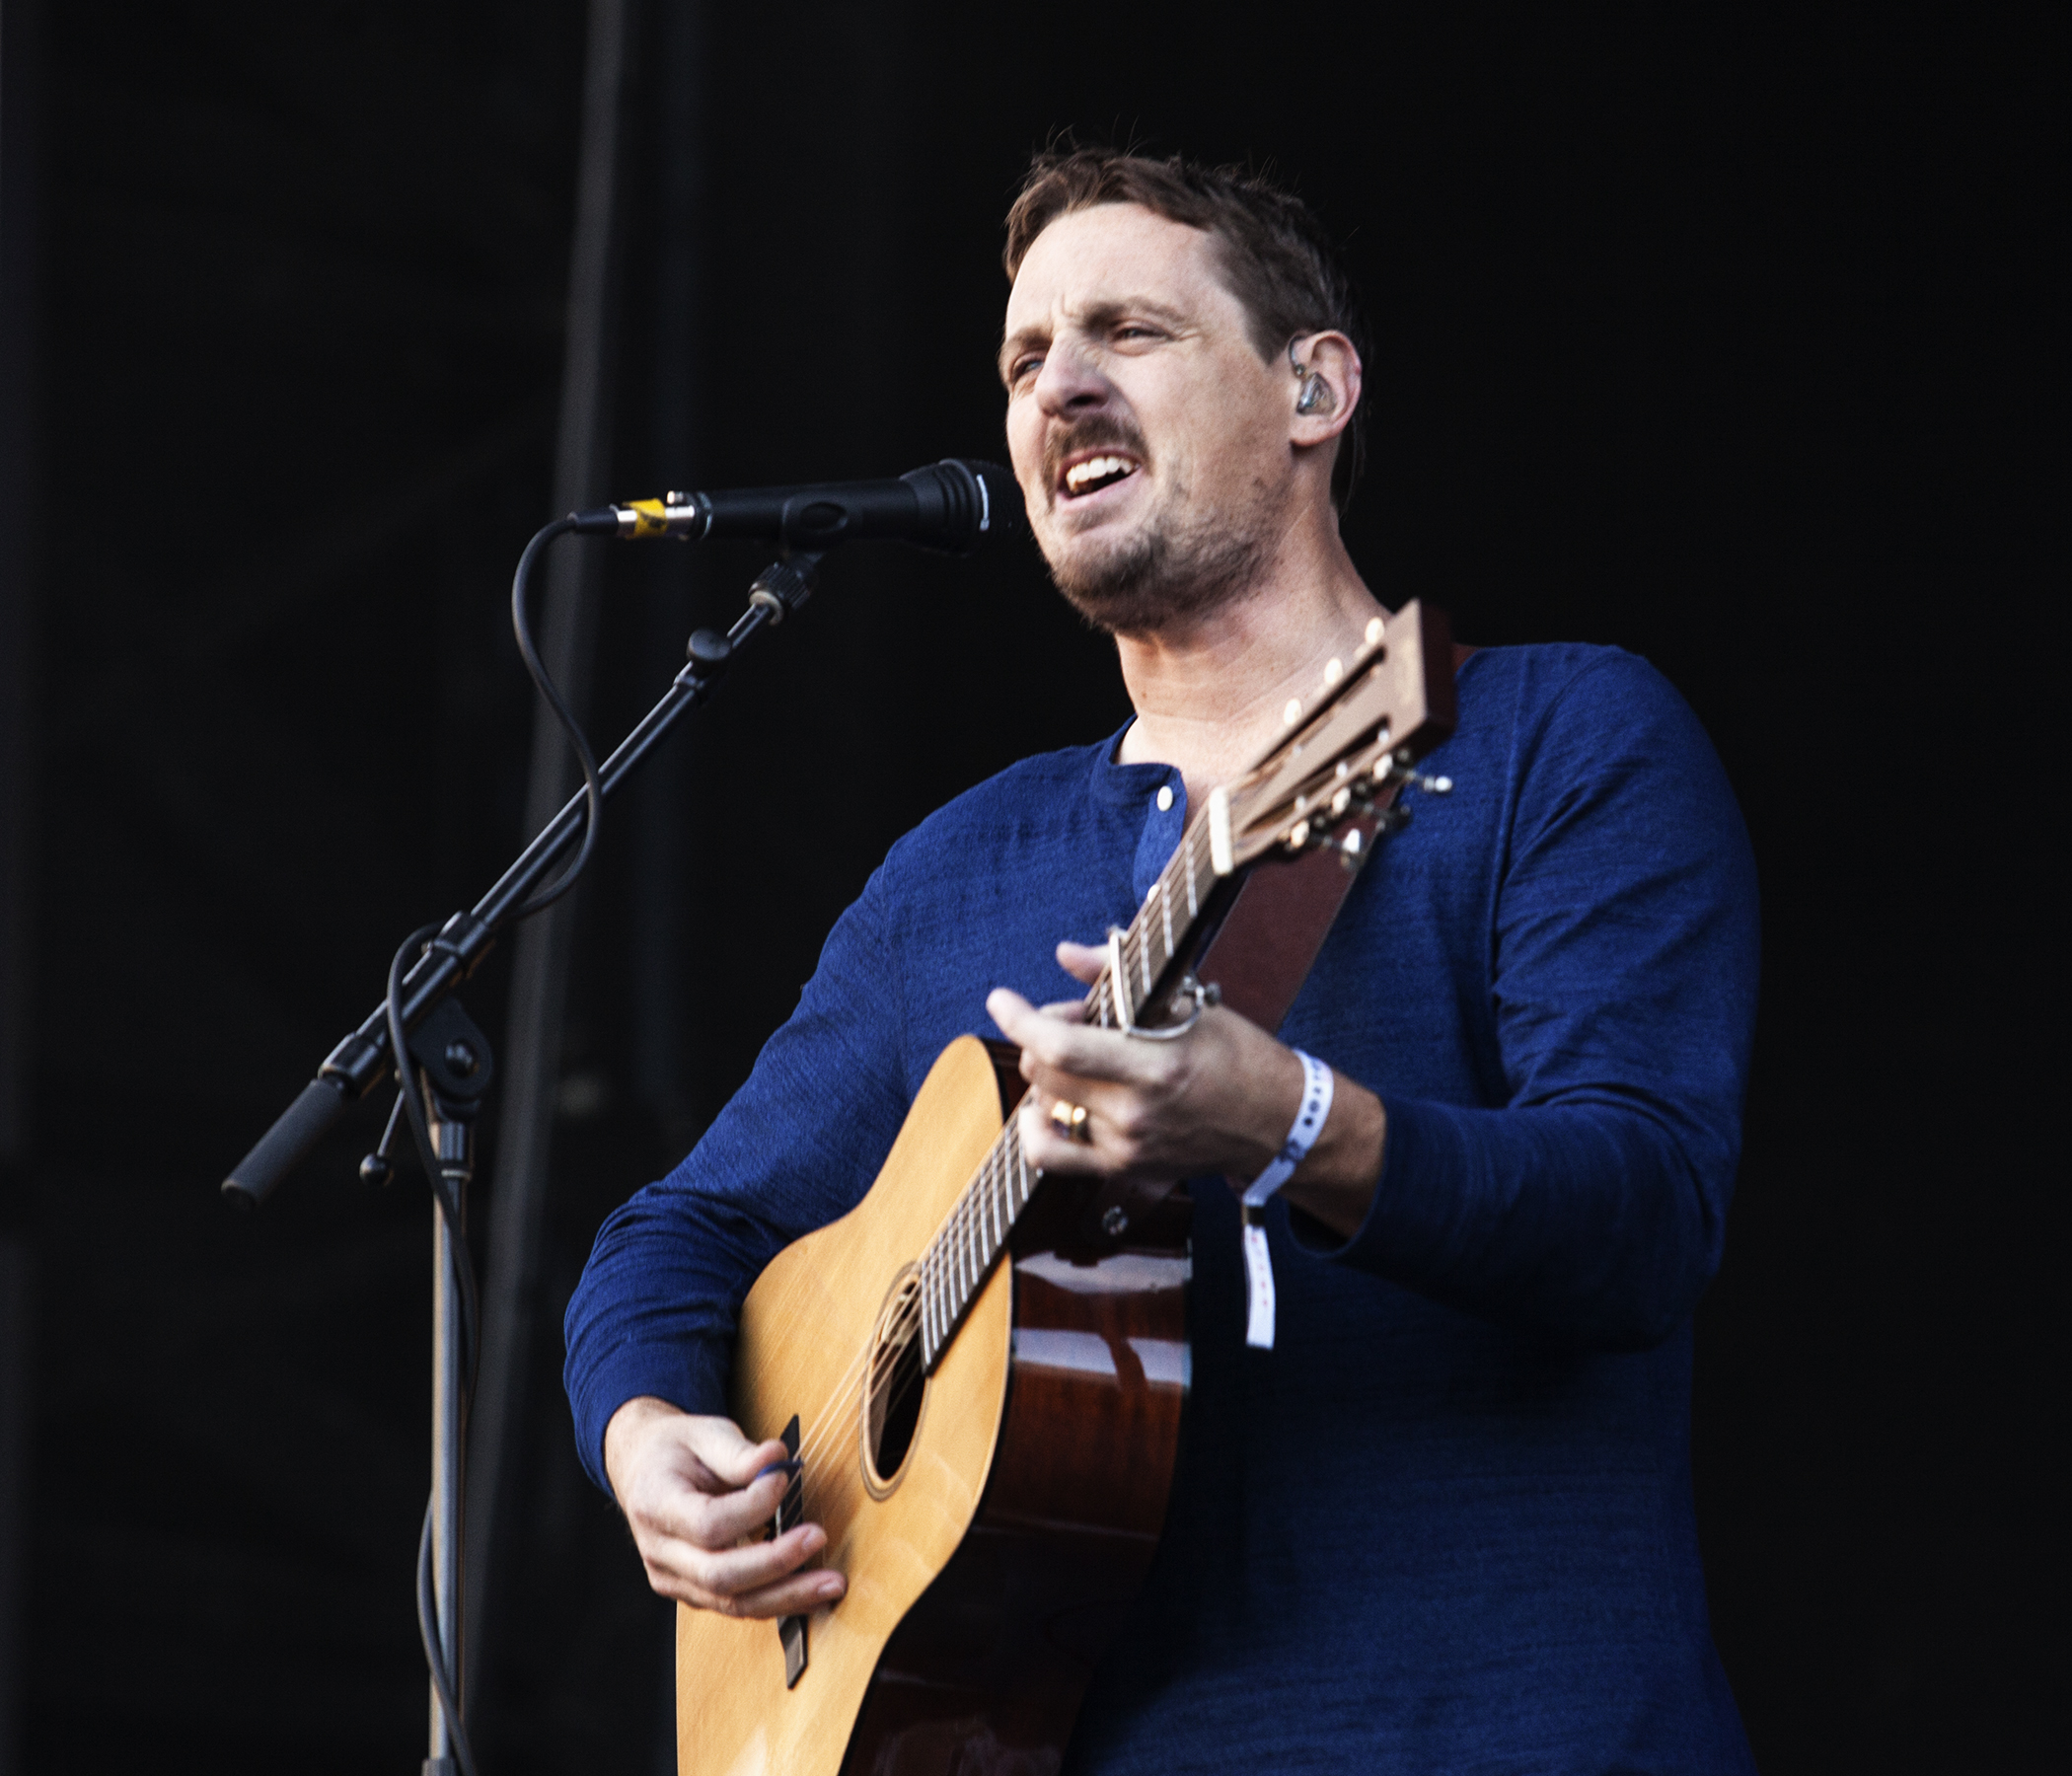 Sturgill Simpson Makes Nirvana’s “In Bloom” an Entirely New Song with